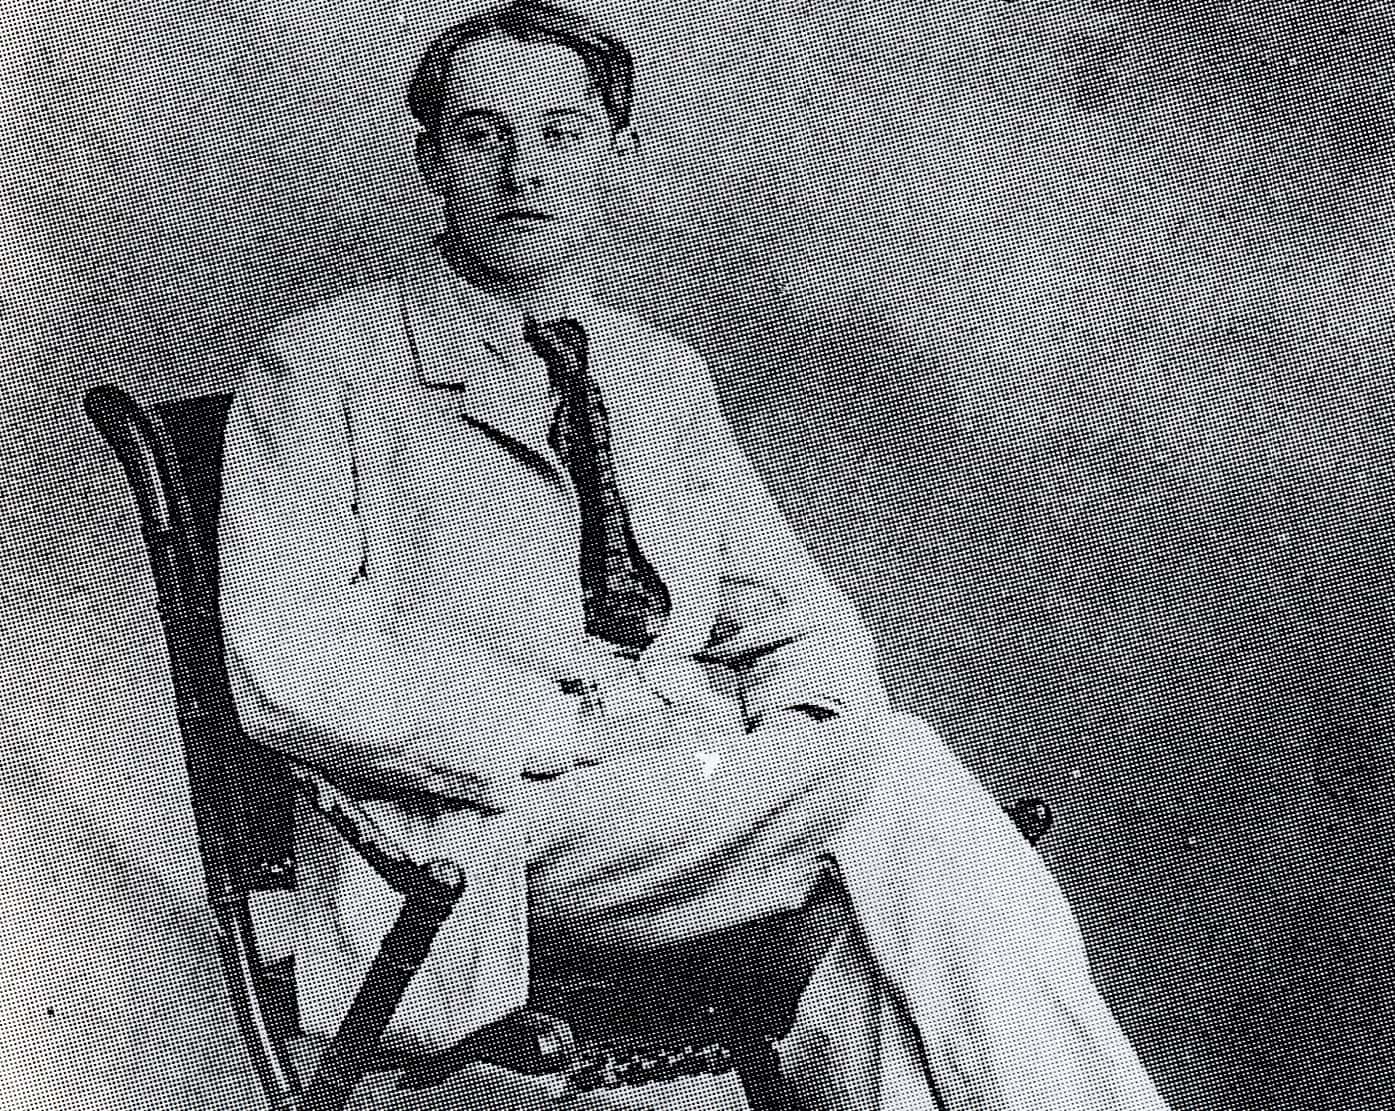 Lord Alfred Douglas facts 